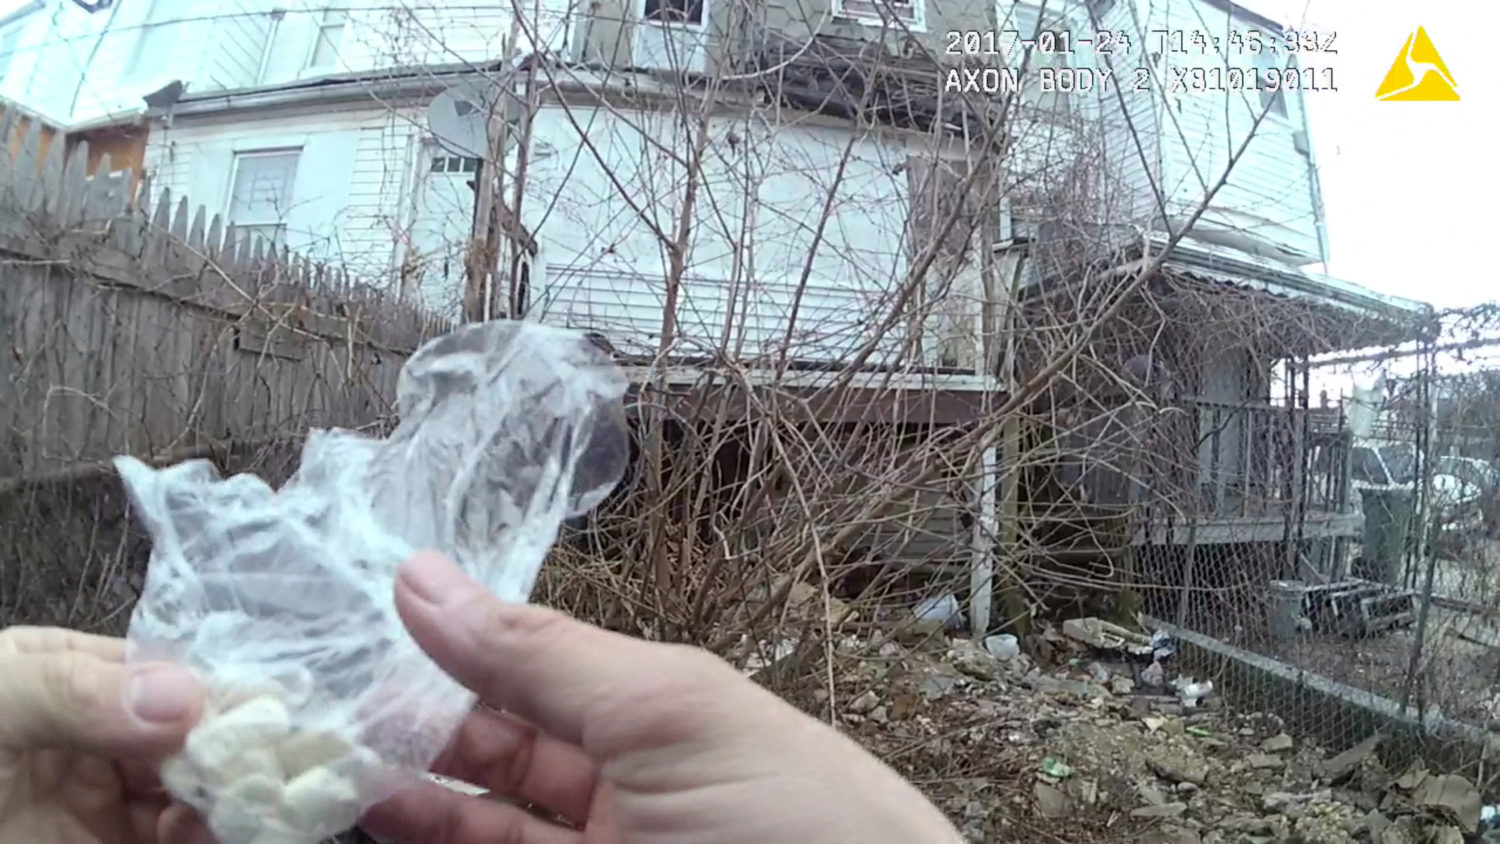 A still image captured from police body camera video appears to show a Baltimore police officer holding a small plastic bag filled with capsules which were filled with heroin powder in the arrest report, according to the Maryland Office of the Public Defender in this image released in Baltimore, Maryland, U.S. on July 19, 2017. Courtesy Baltimore Police Department/Handout via REUTERS